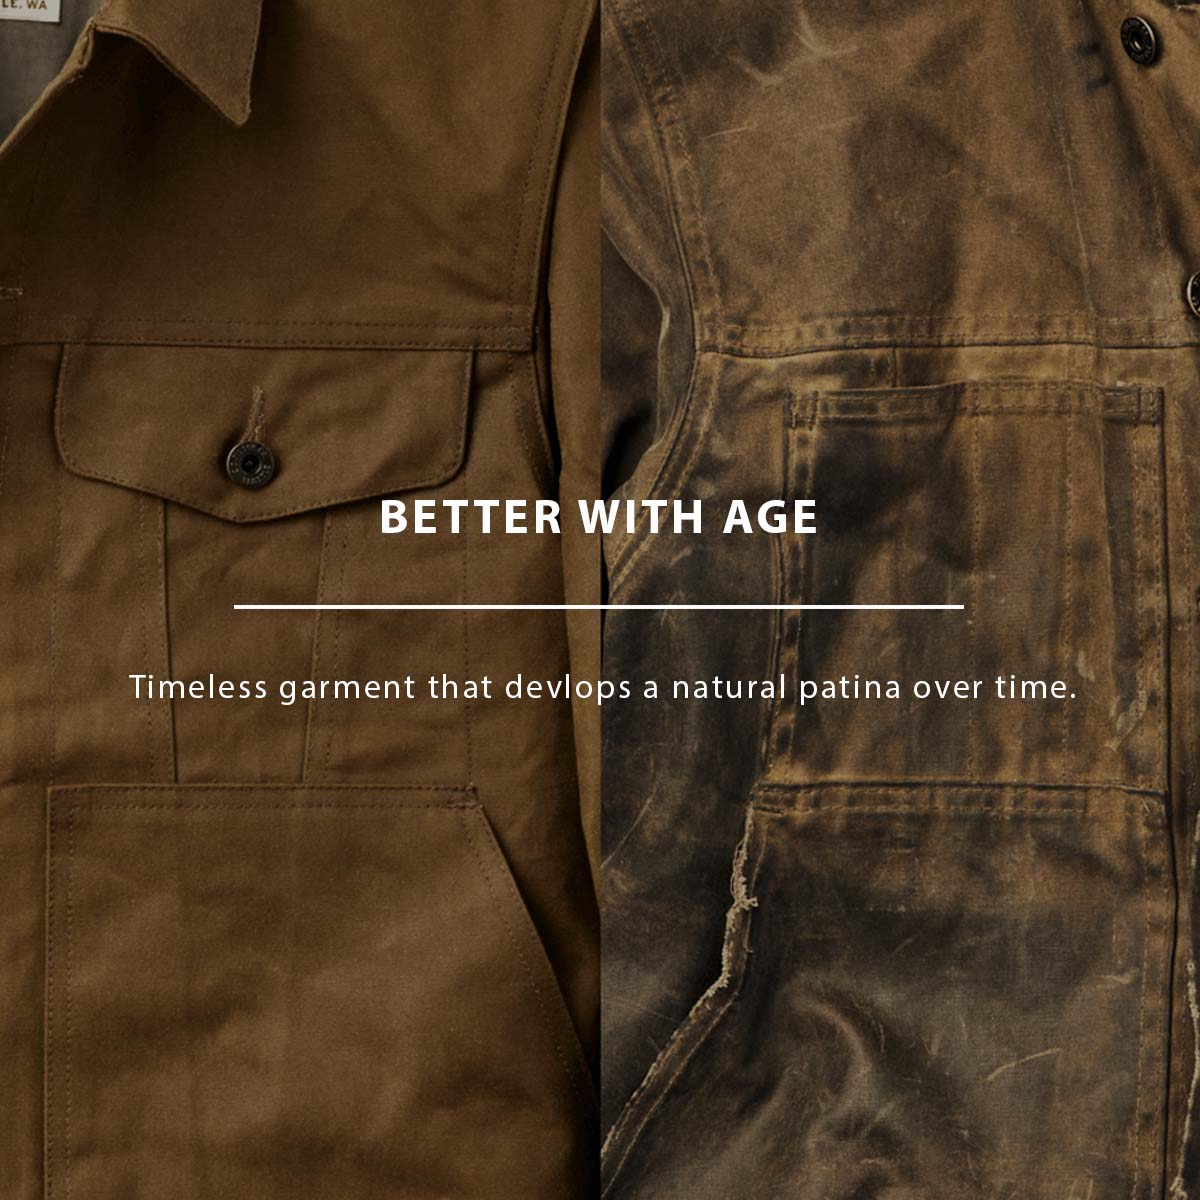 Filson Tin Cloth Work Jacket, better with age.